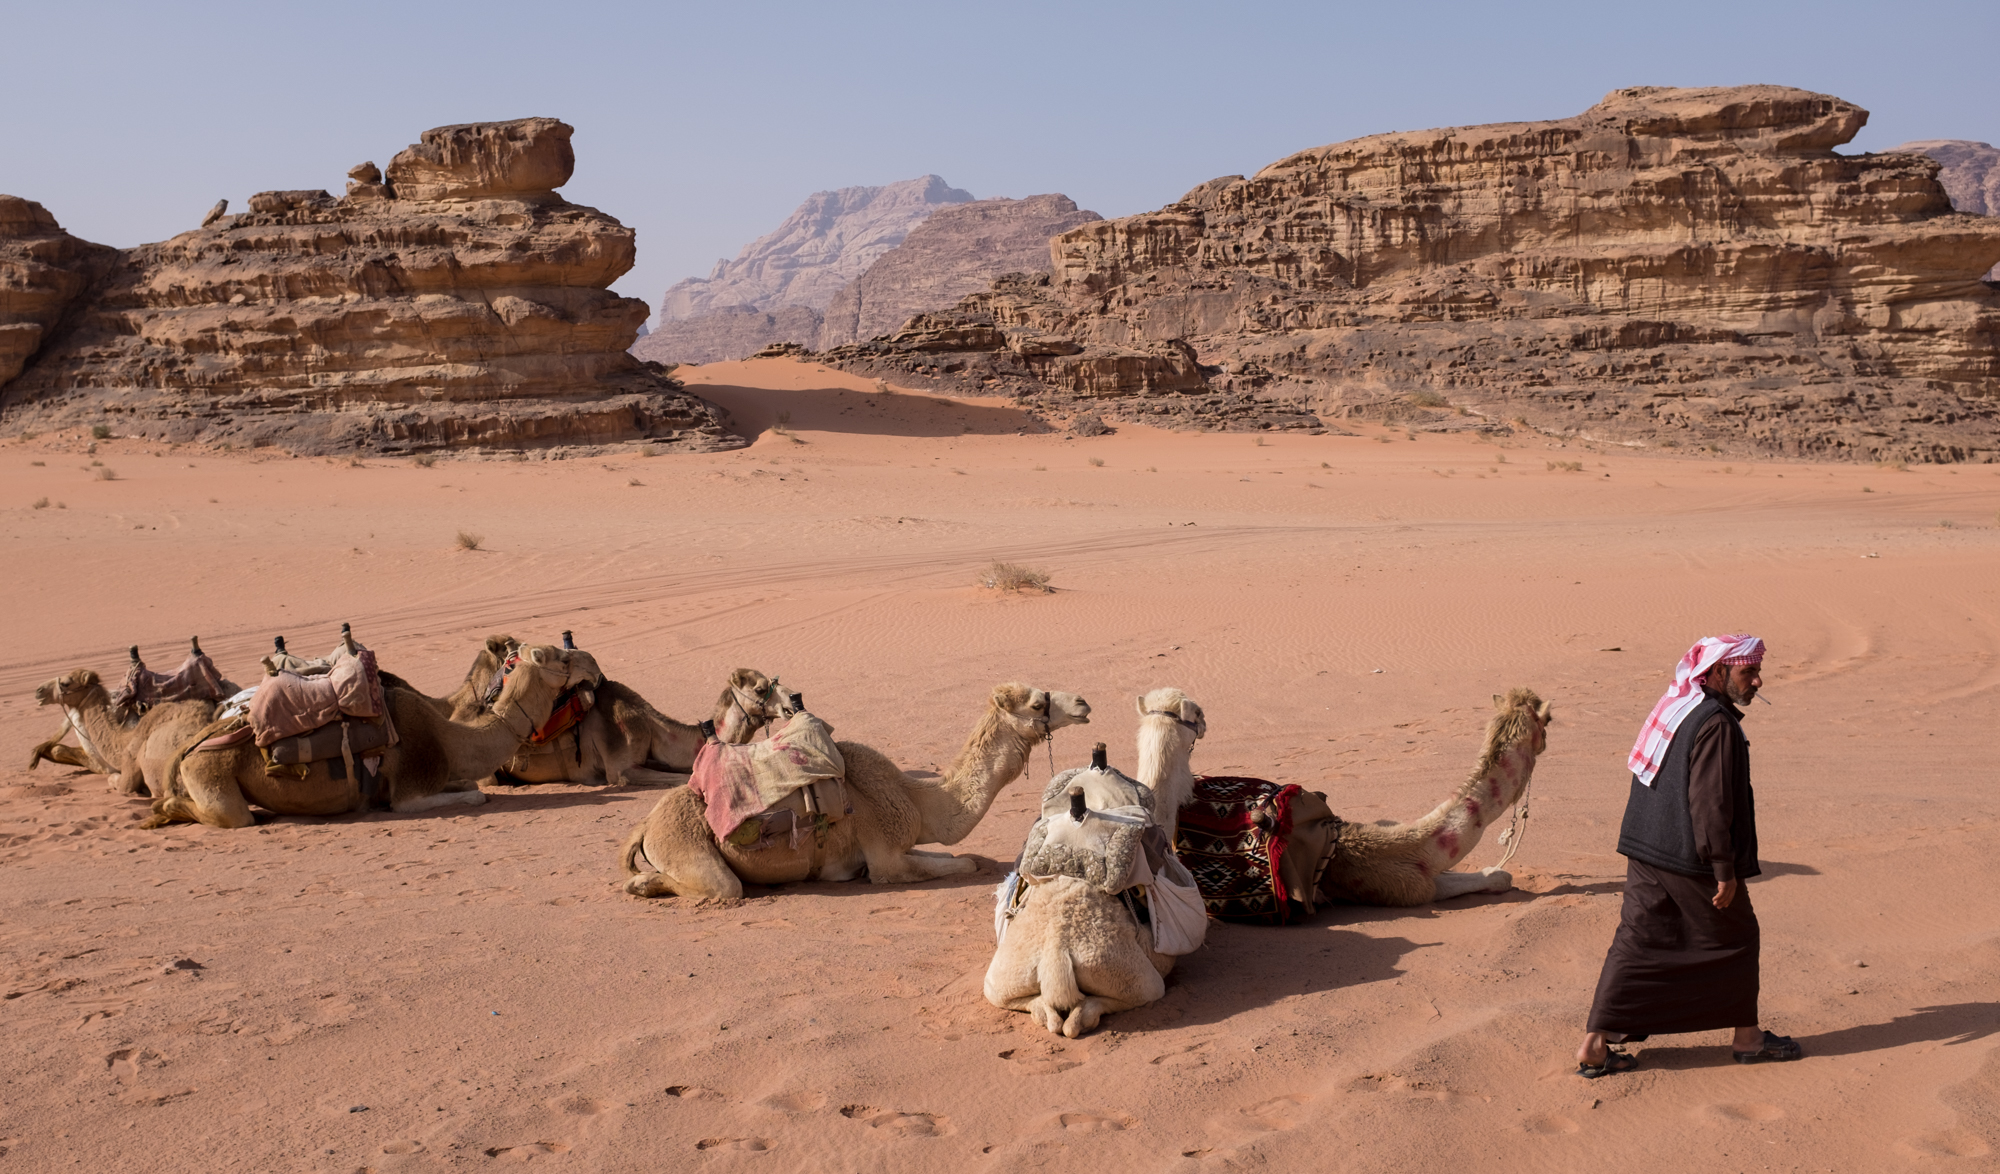 A Bedouin man rests his camels in the Jordanian desert.